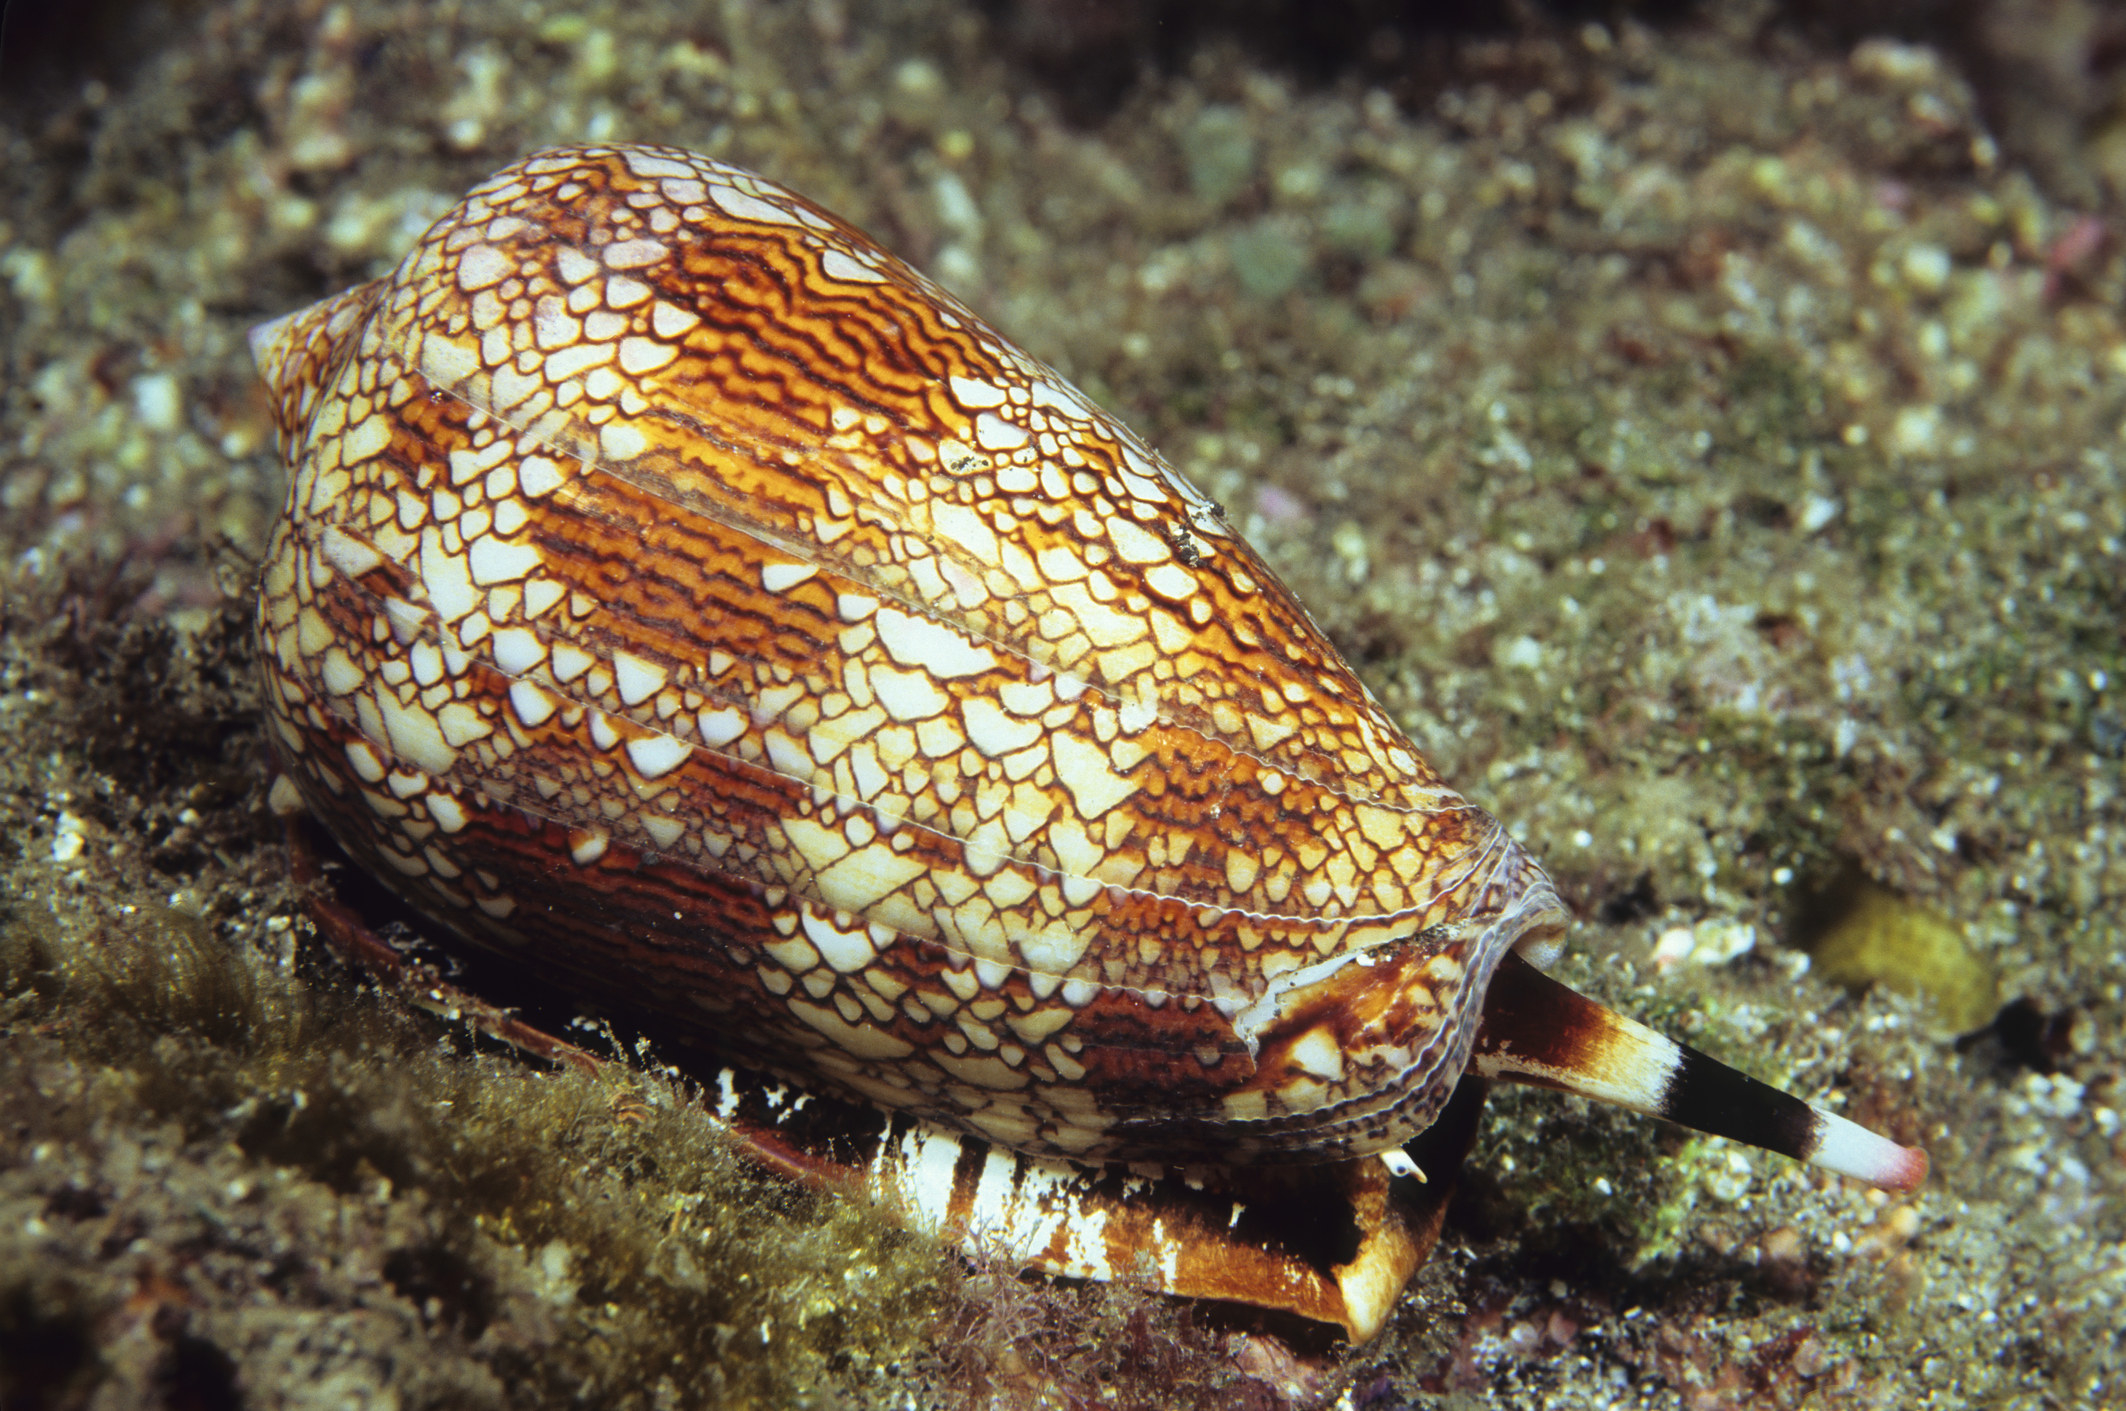 A cone snail in the water